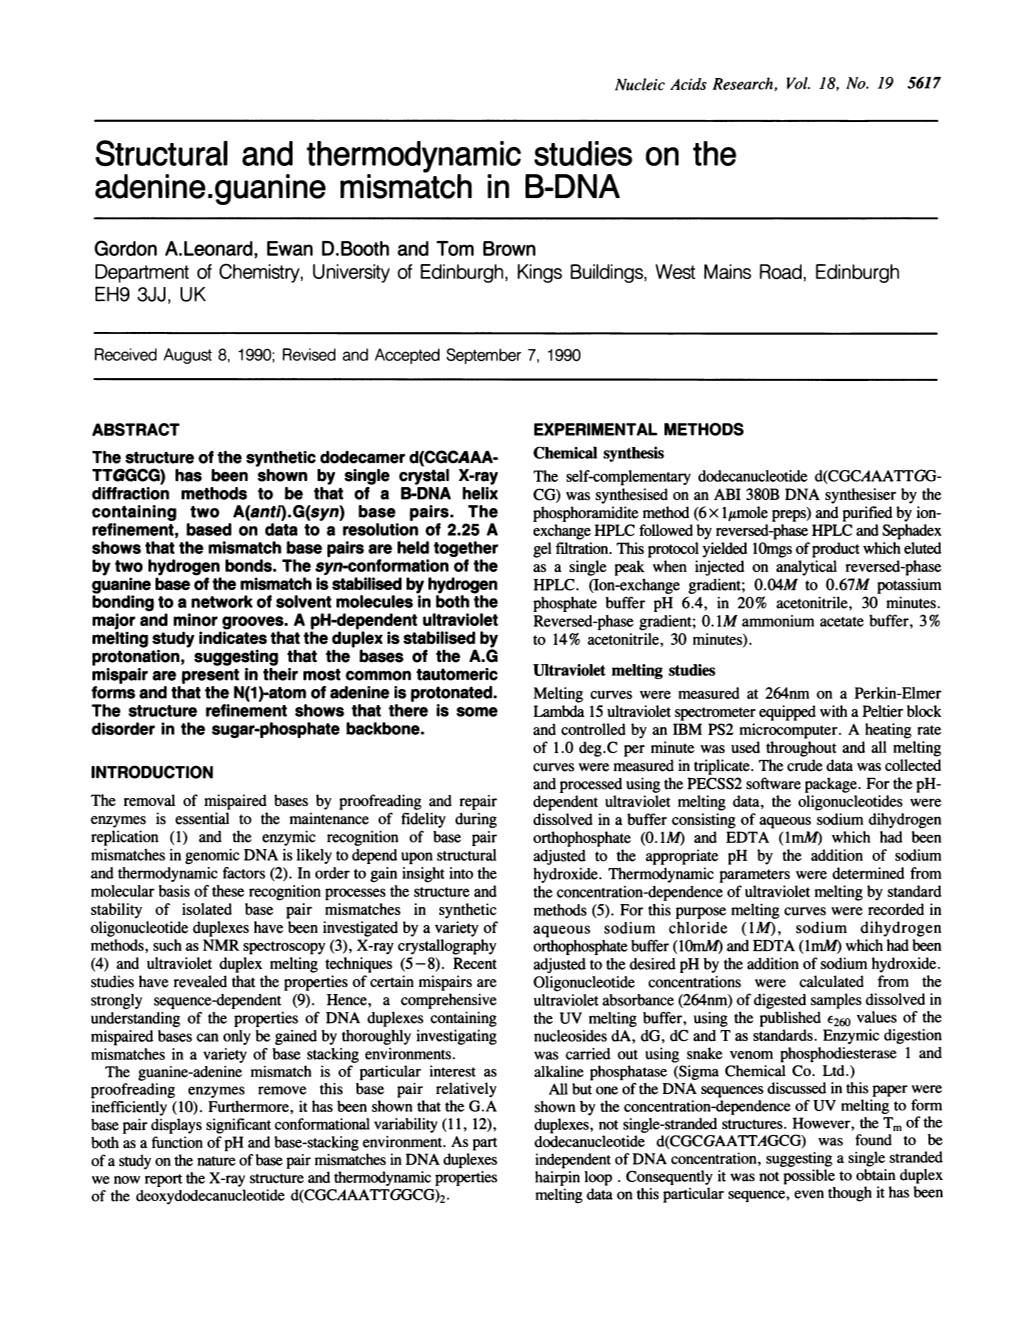 Structural and Thermodynamic Studies on the Adenine.Guanine Mismatch in B-DNA